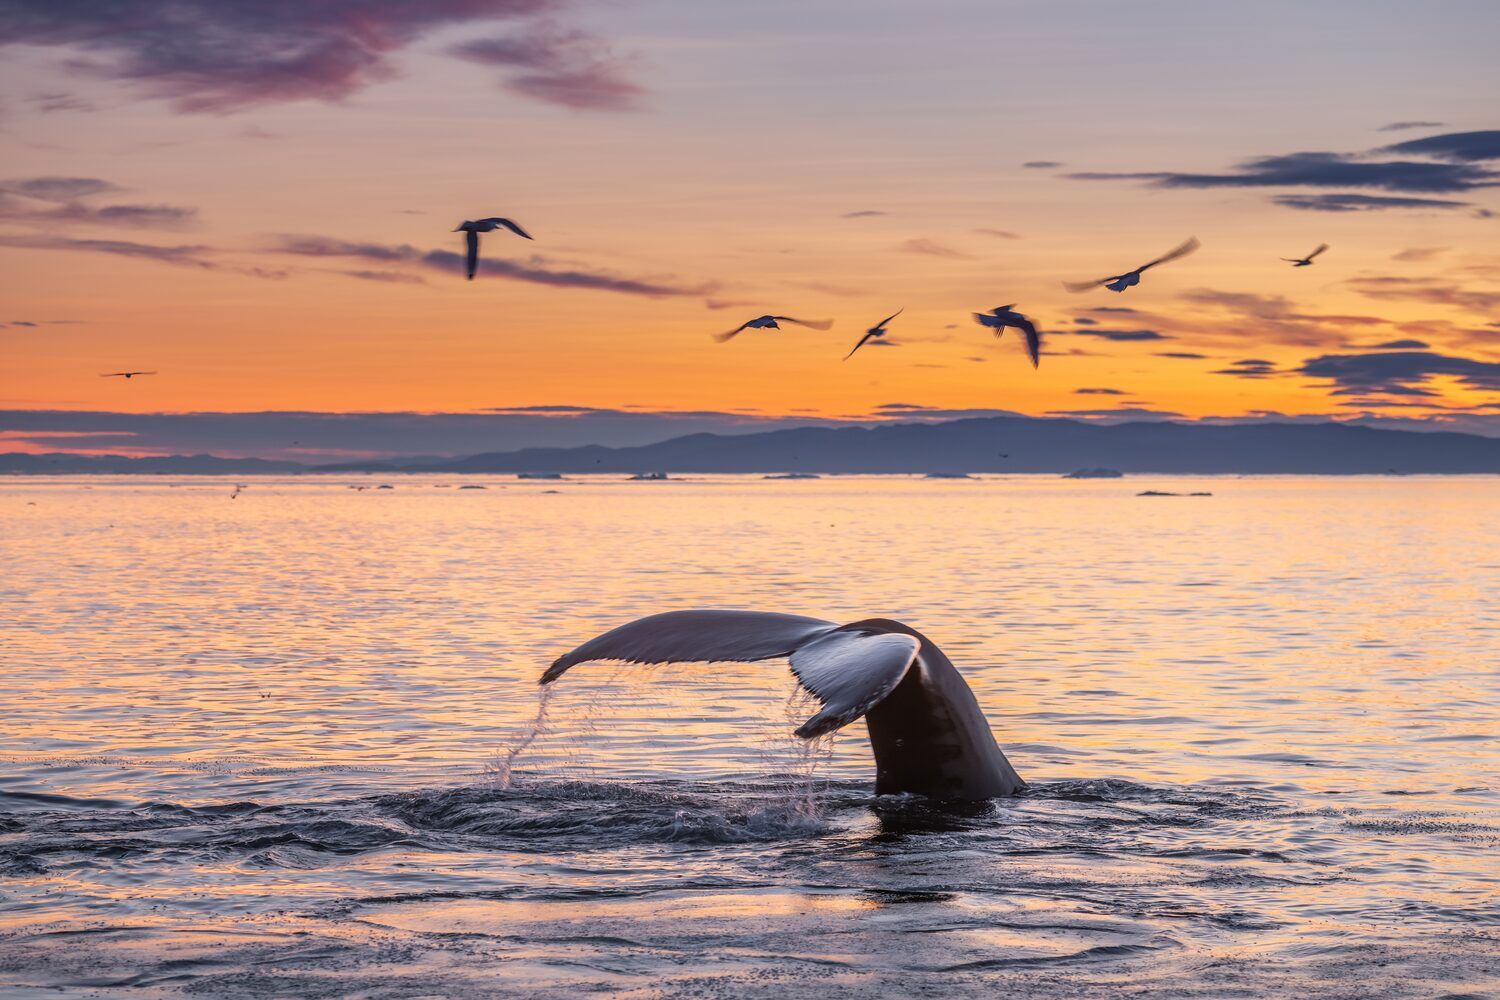 Whale tail splashing out of the ocean, with a beautiful orange sunset with seagulls flying in the sky.